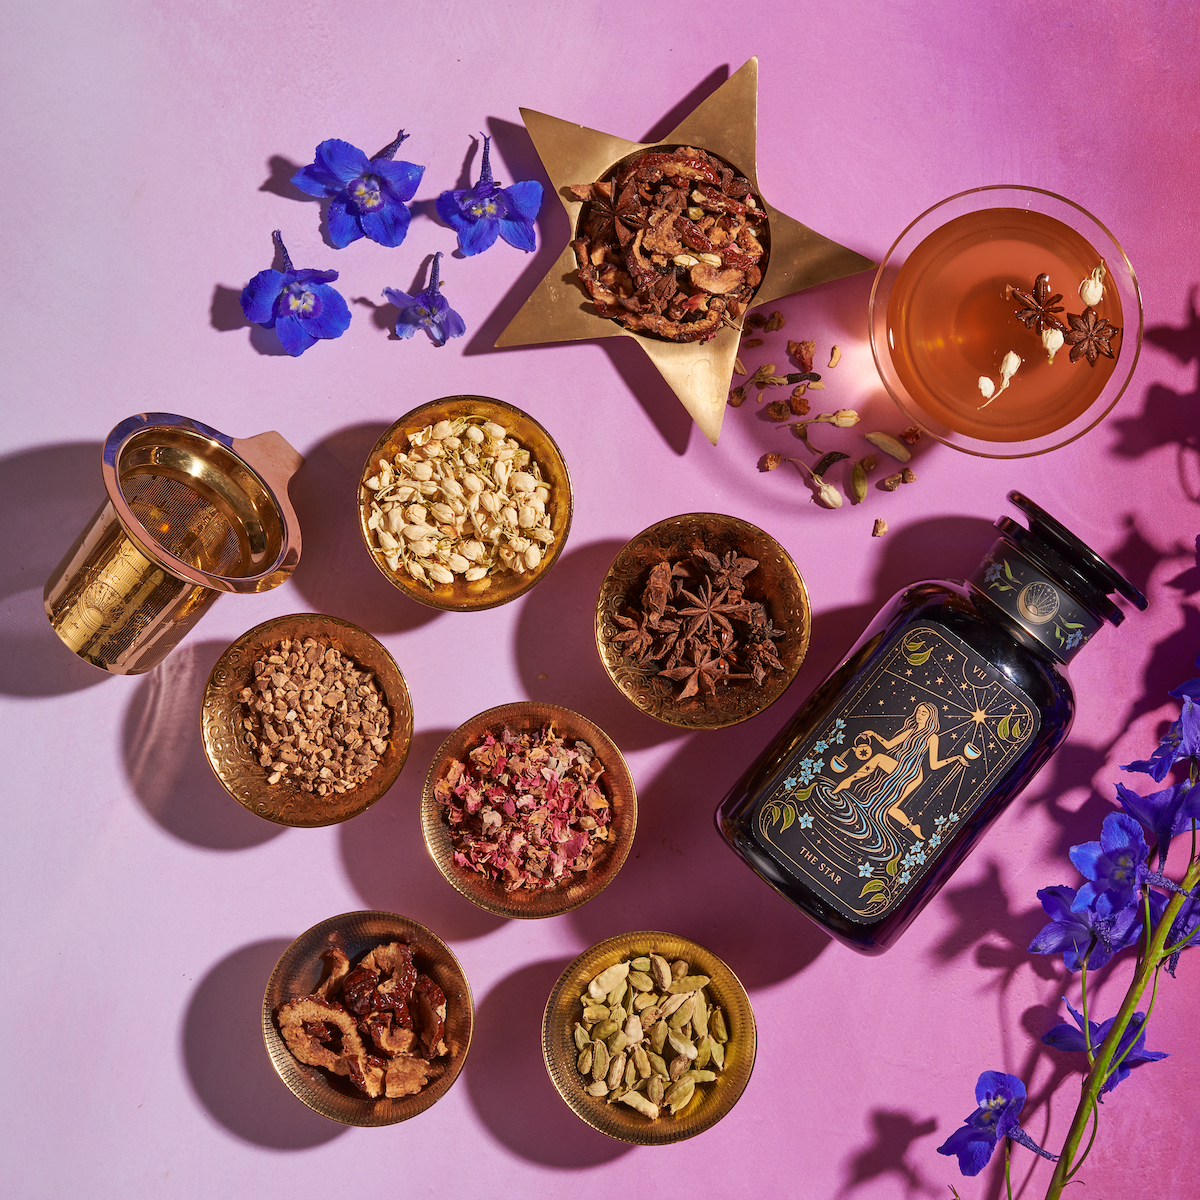 A flat lay photo featuring an assortment of organic tea leaves and spices in gold bowls, a cup of loose leaf tea, a tea strainer, blue flowers, and a decorative black Monthly Magic First Sips Tea Subscription Box with gold accents from Magic Hour, all arranged on a pink and purple gradient background.